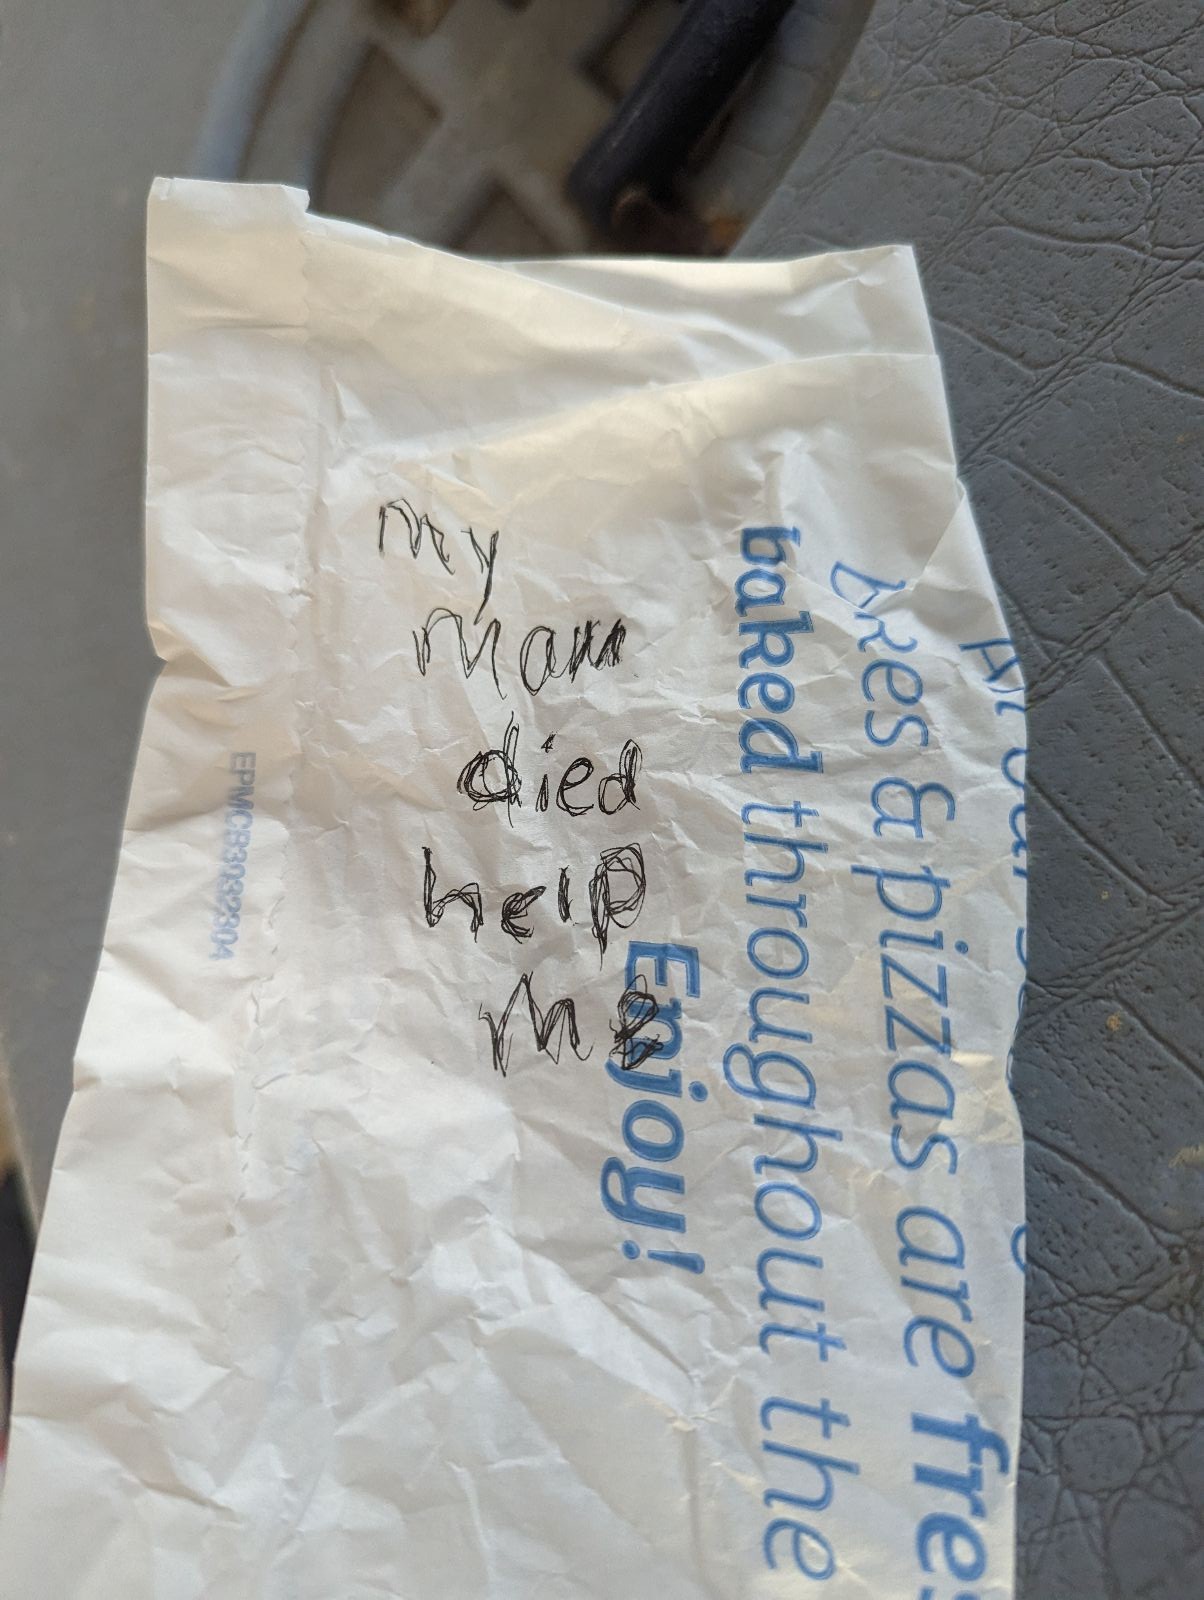 Note written with black pen on a white and blue paper bag